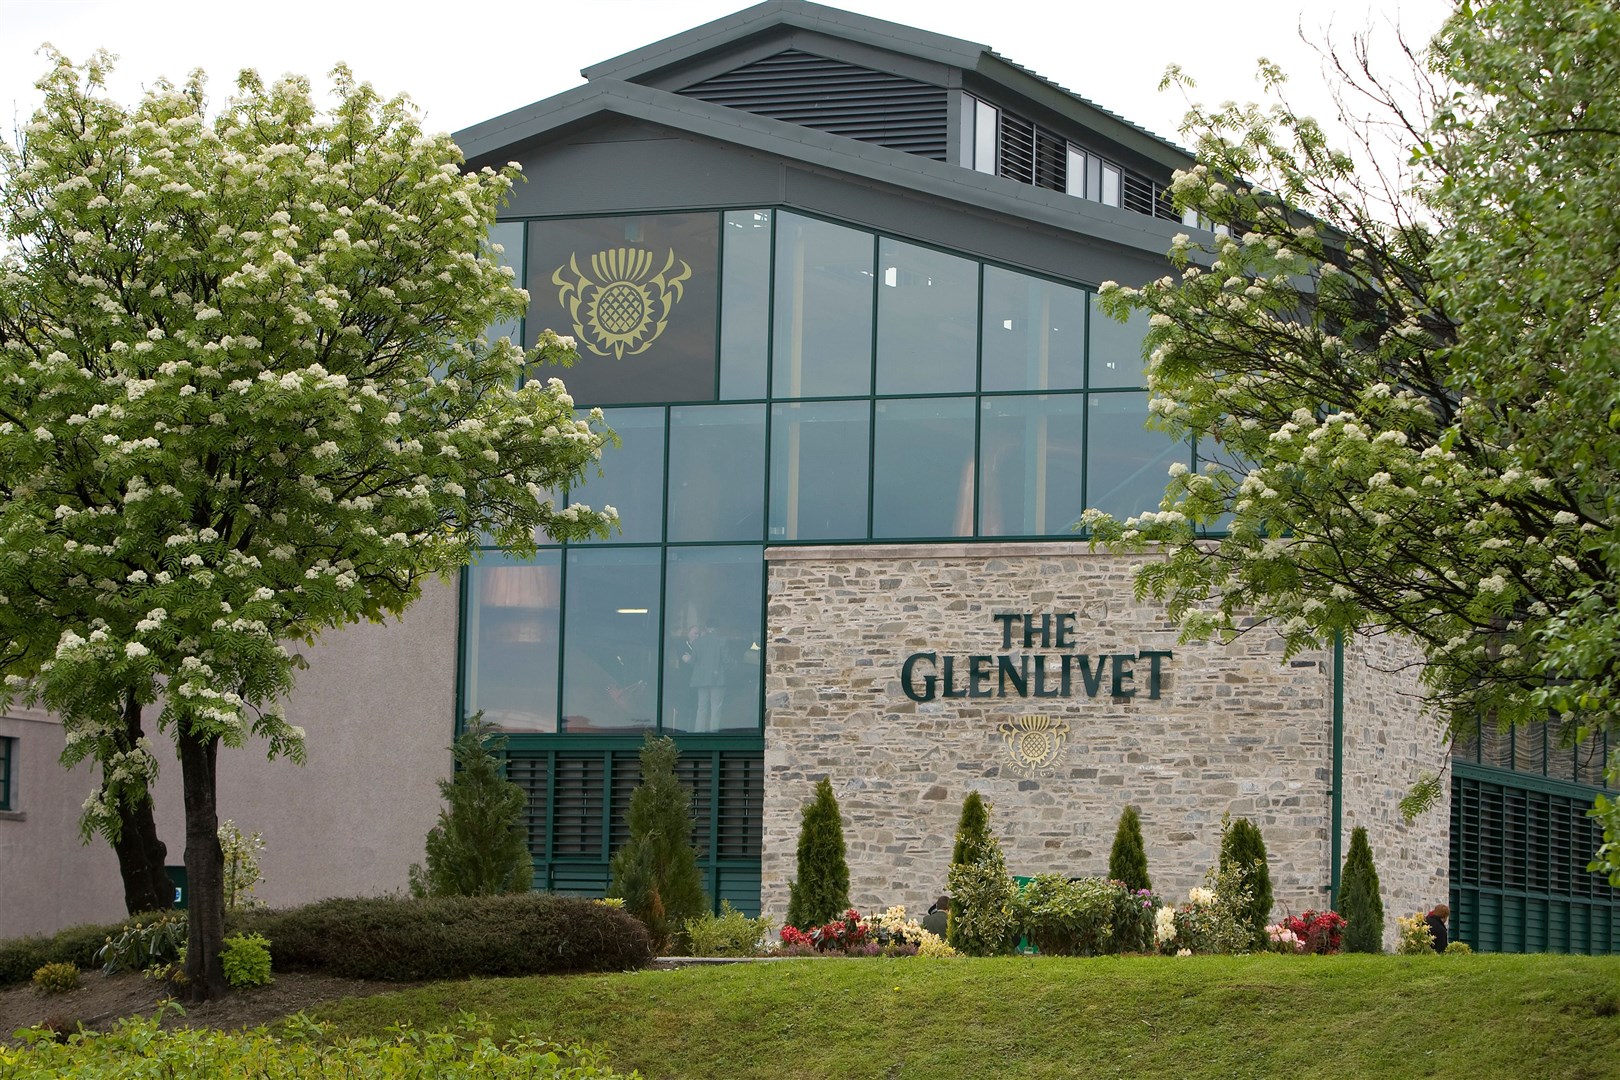 The Glenlivet is one of the most popular single malts in the world.